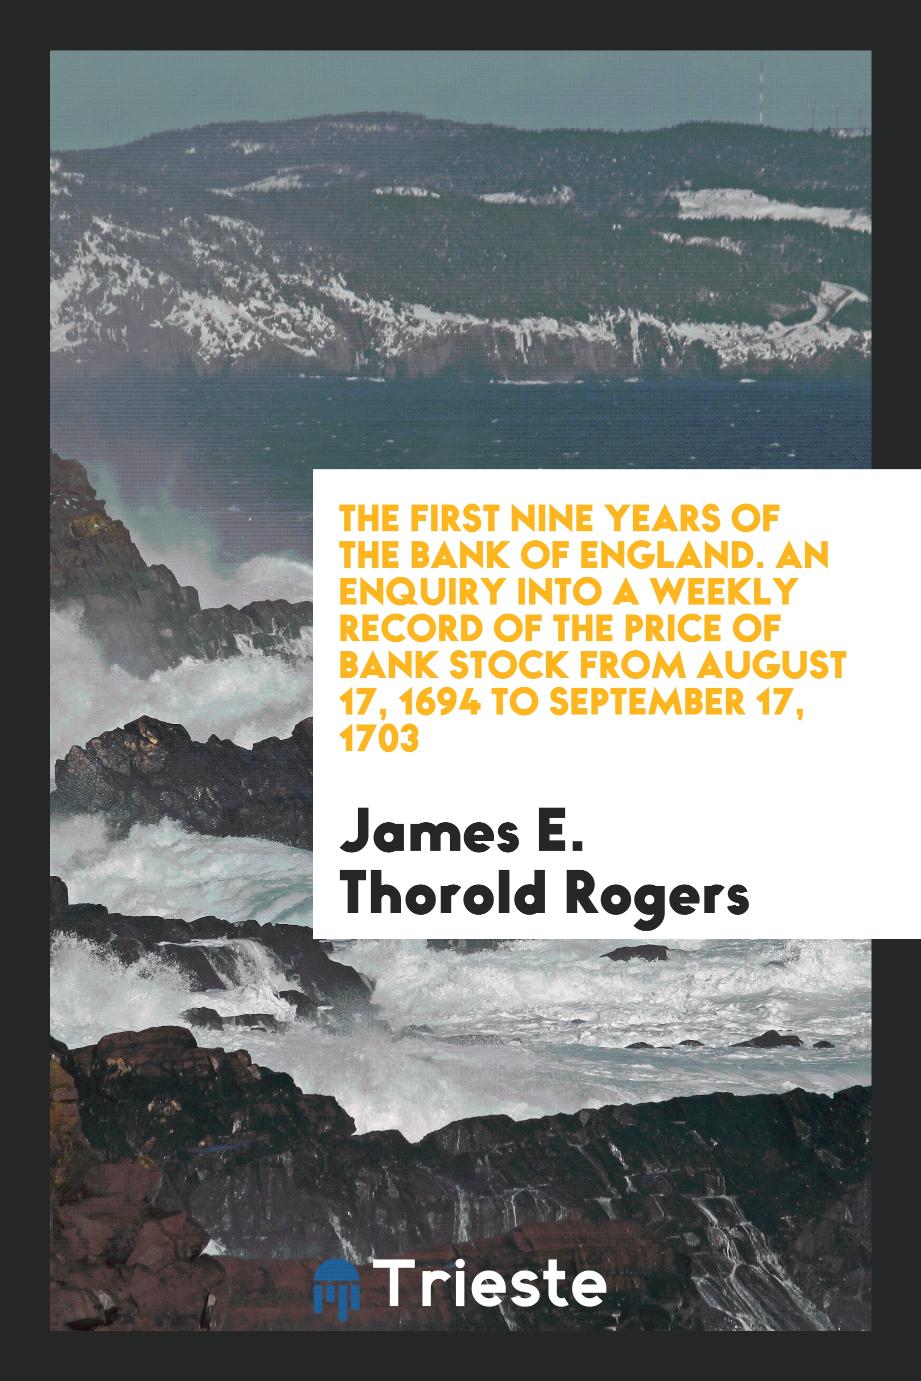 The first nine years of the Bank of England. An enquiry into a weekly record of the price of bank stock from August 17, 1694 to September 17, 1703